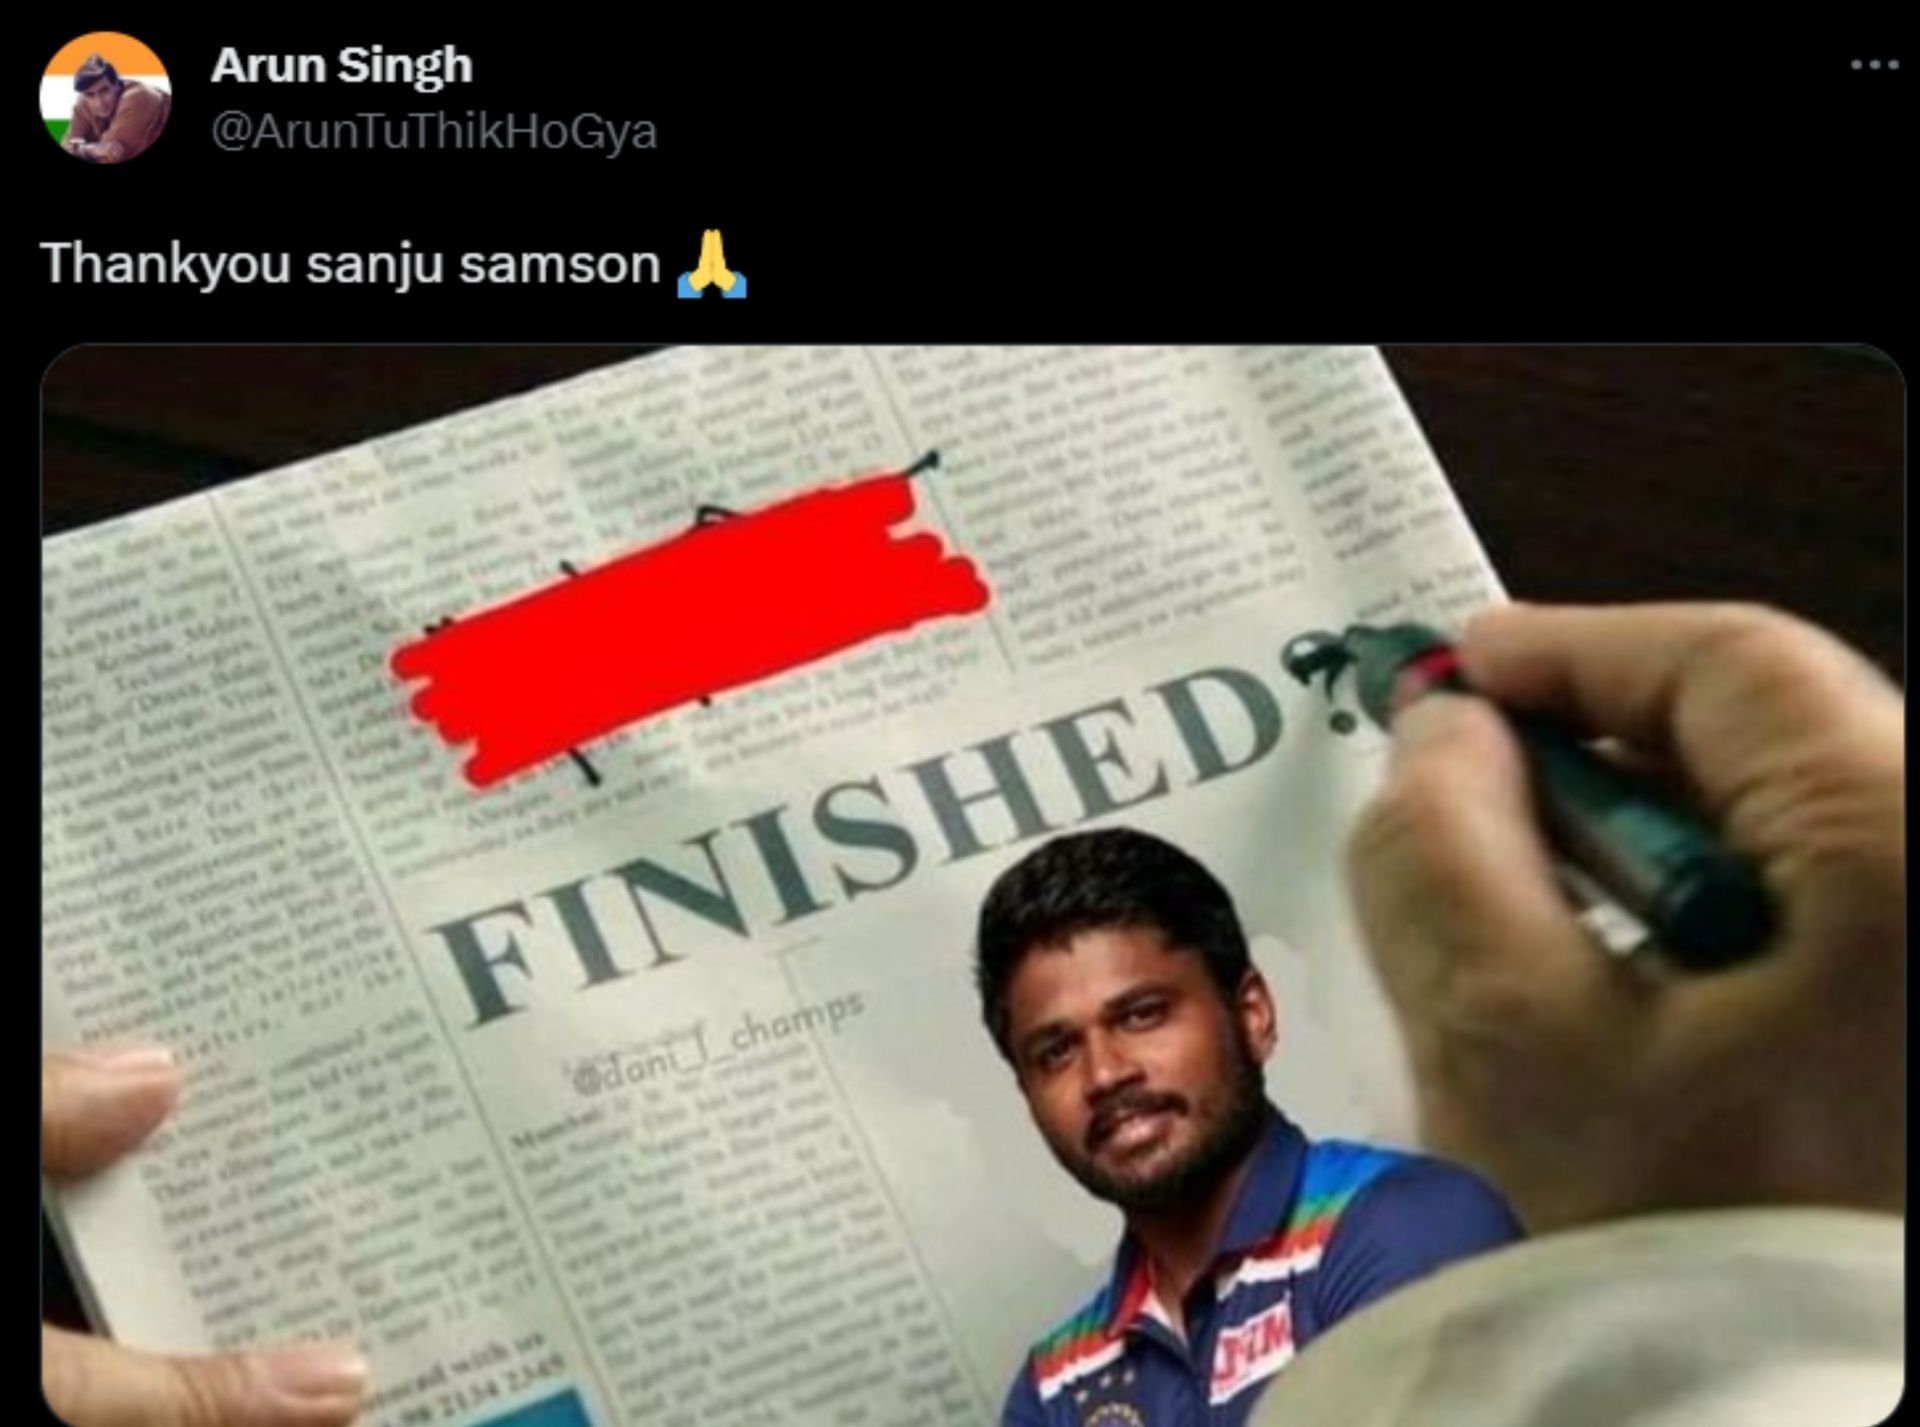 A fan shared a meme after the first innings of the 5th T20I on Sunday.